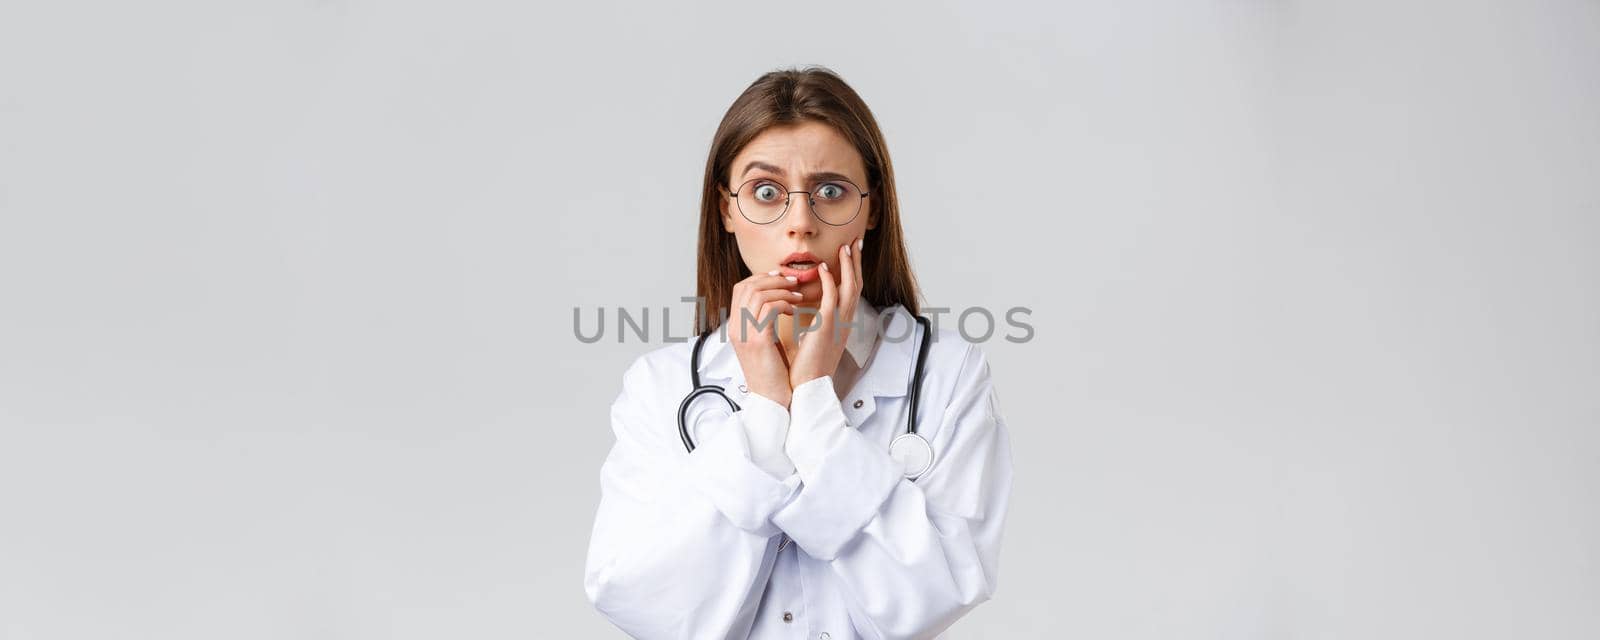 Healthcare workers, medicine, insurance and covid-19 pandemic concept. Shocked scared and concerned female doctor in white scrubs and glasses listening to scary news, gasping, hold hands near lips.